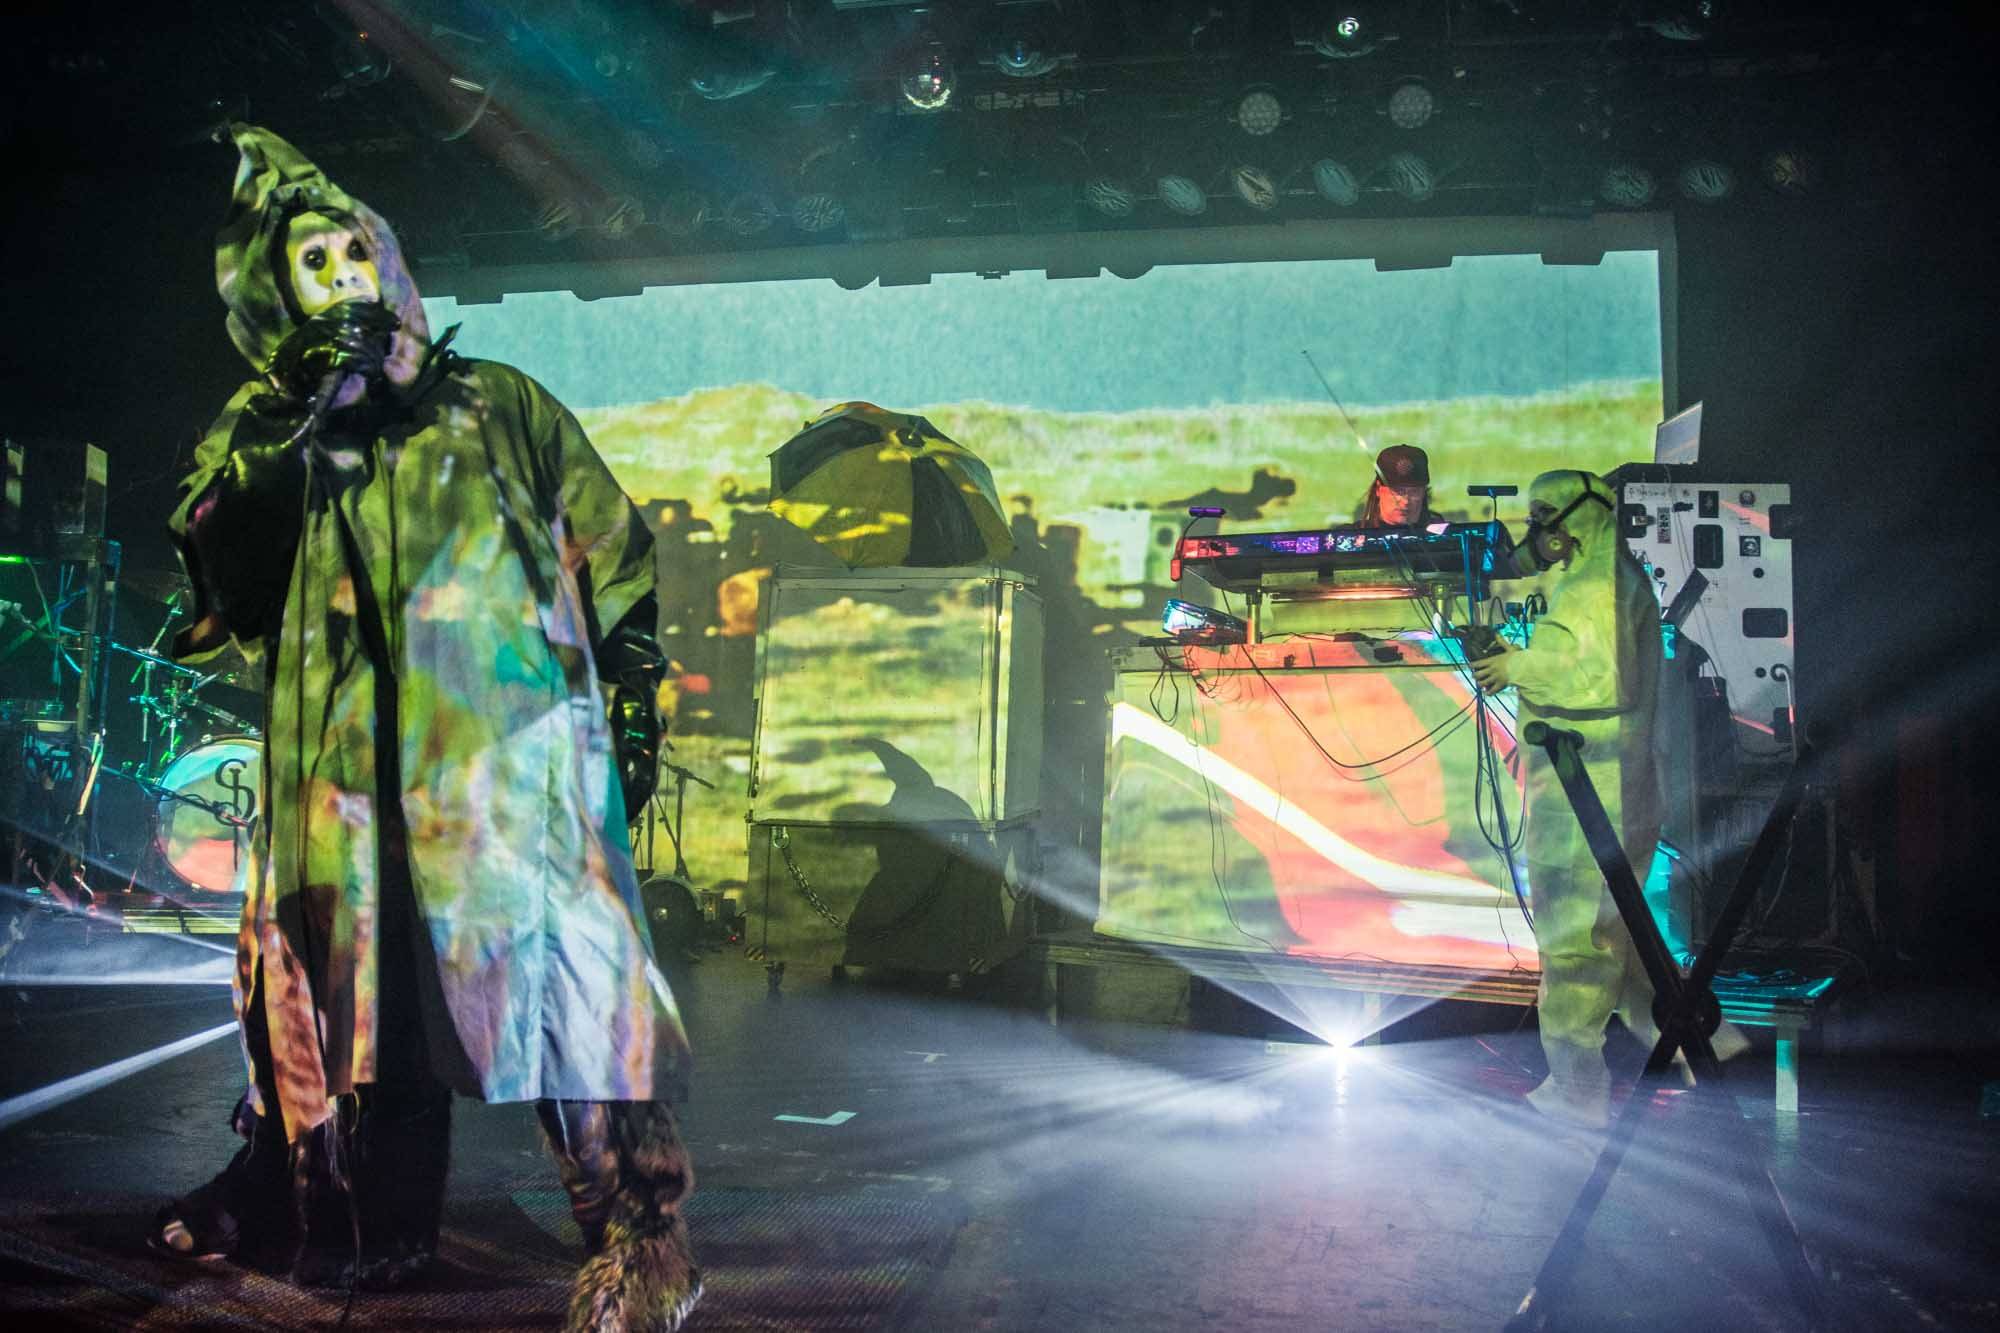 Skinny Puppy at the Commodore Ballroom, Vancouver, Dec. 16 2014. Pavel Boiko photo.